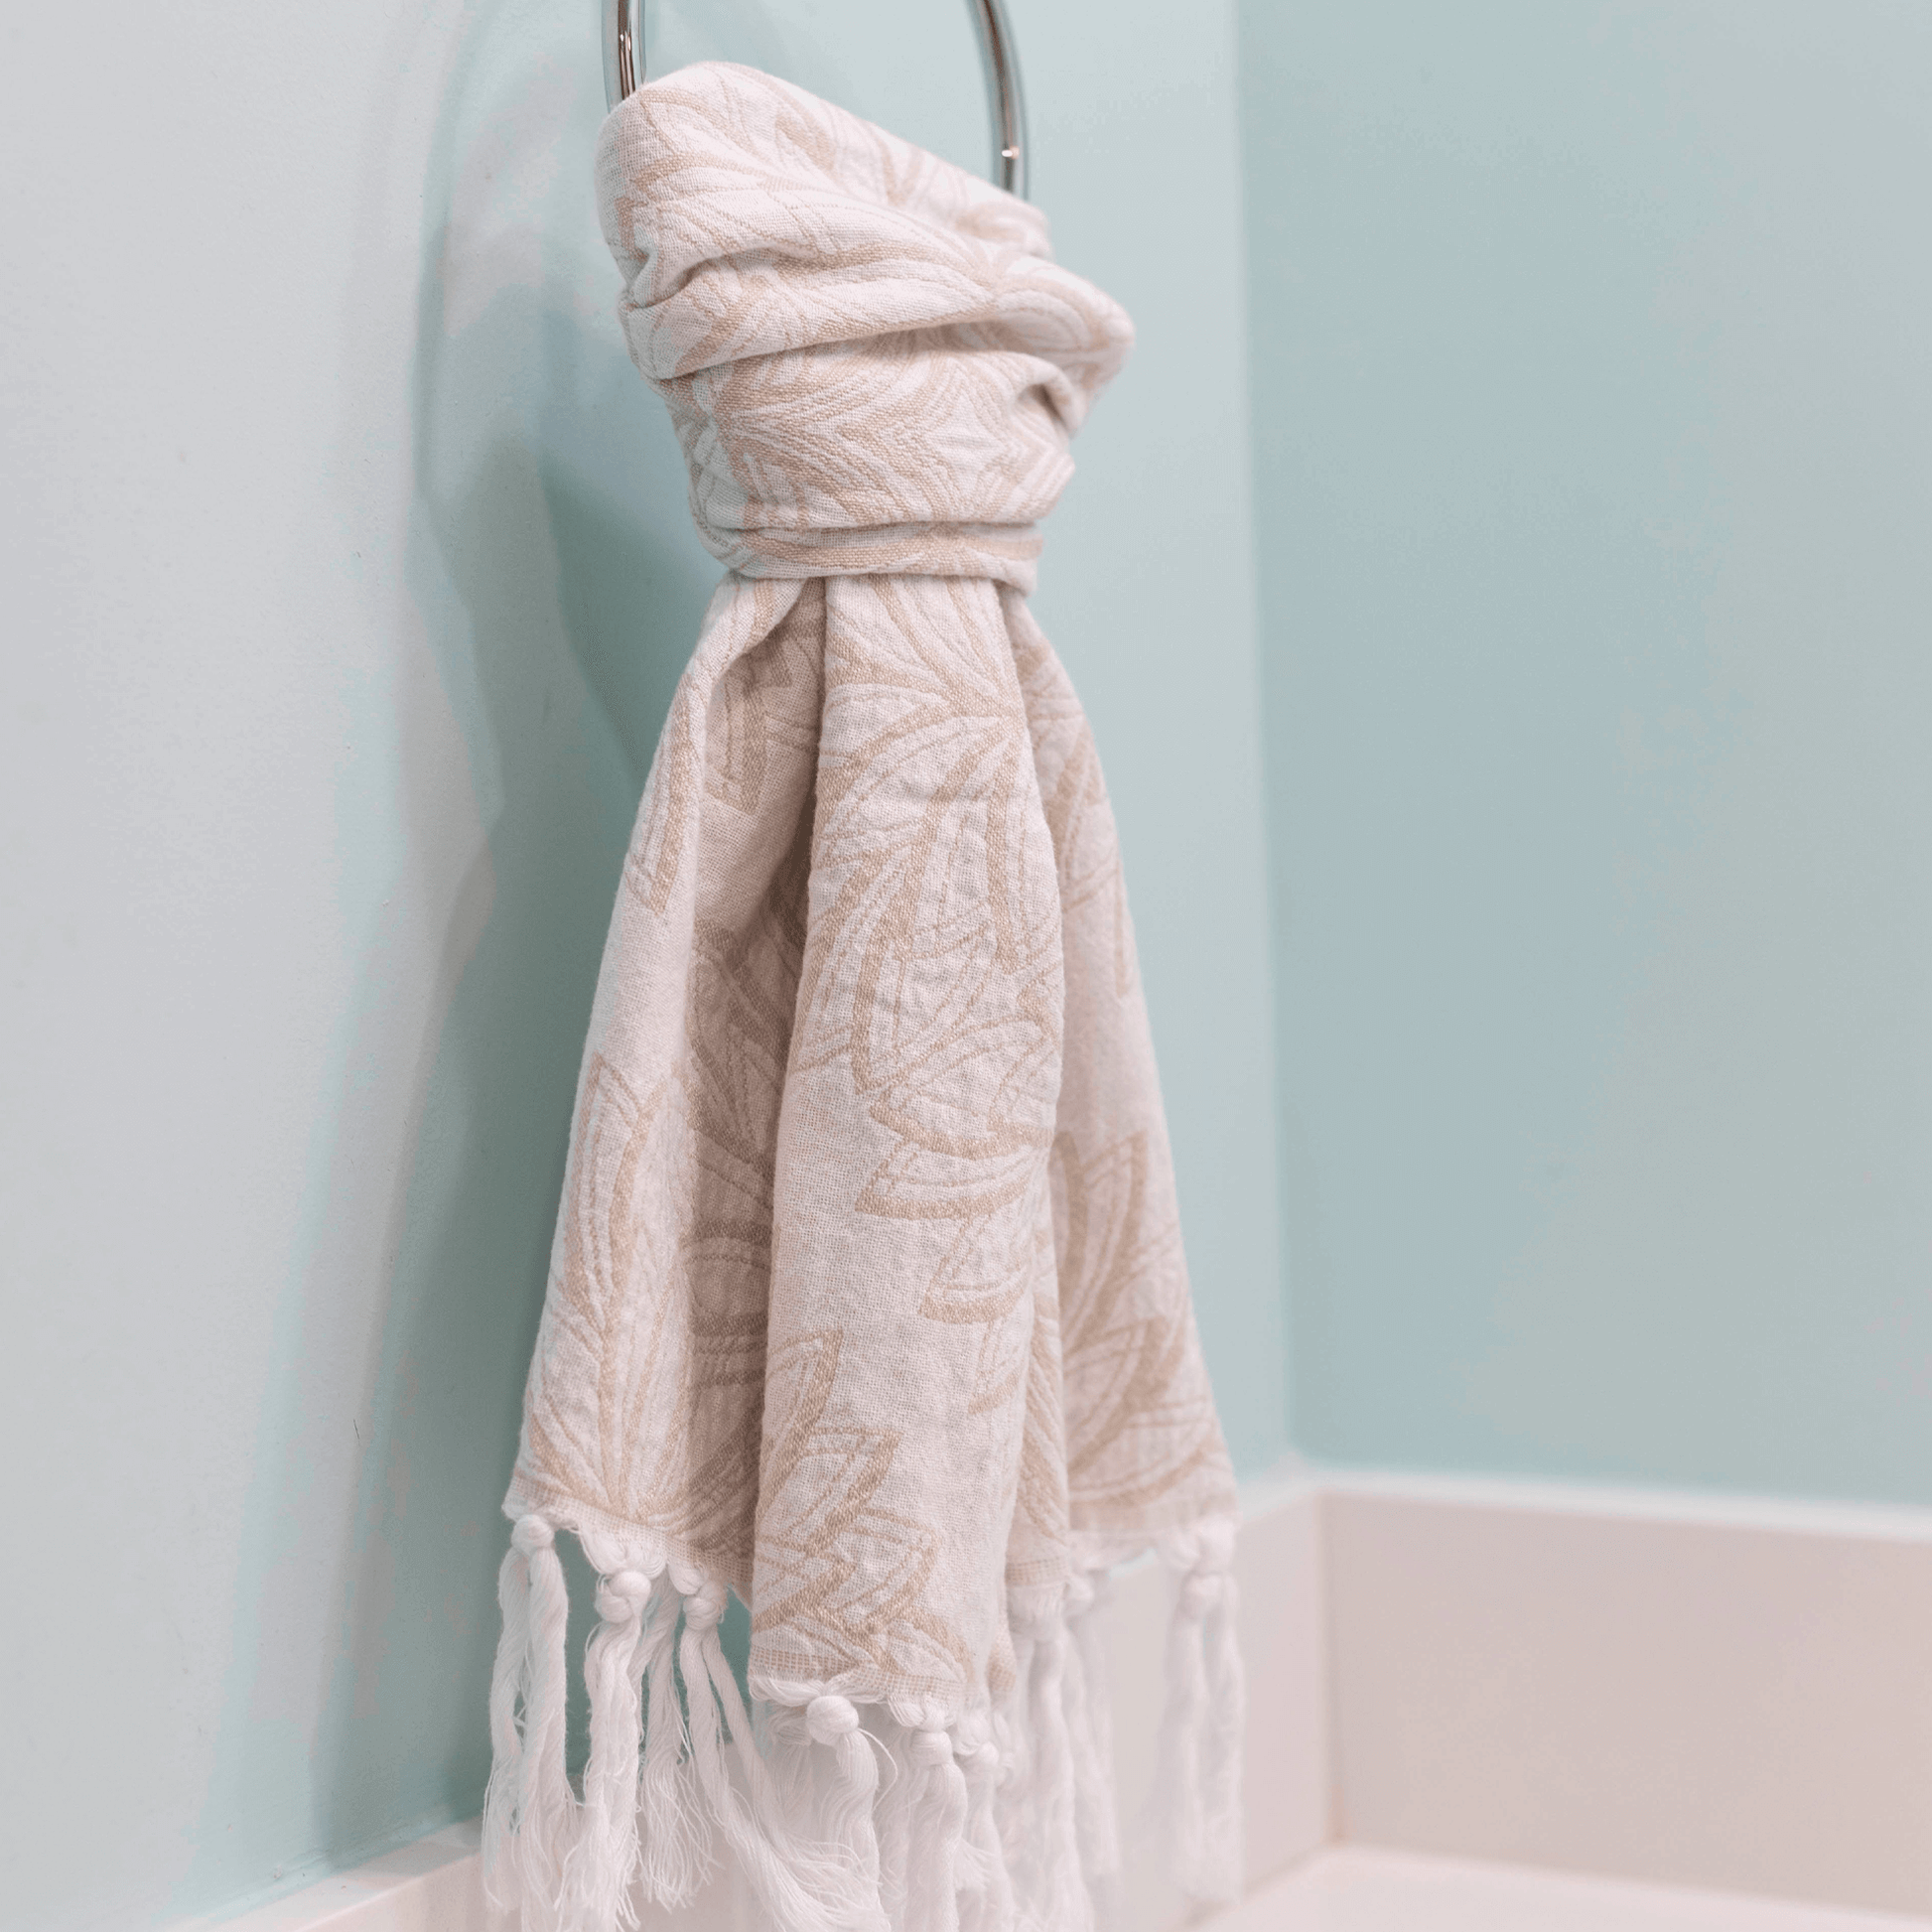 oat and white Turkish hand towel hanging in the bathroom